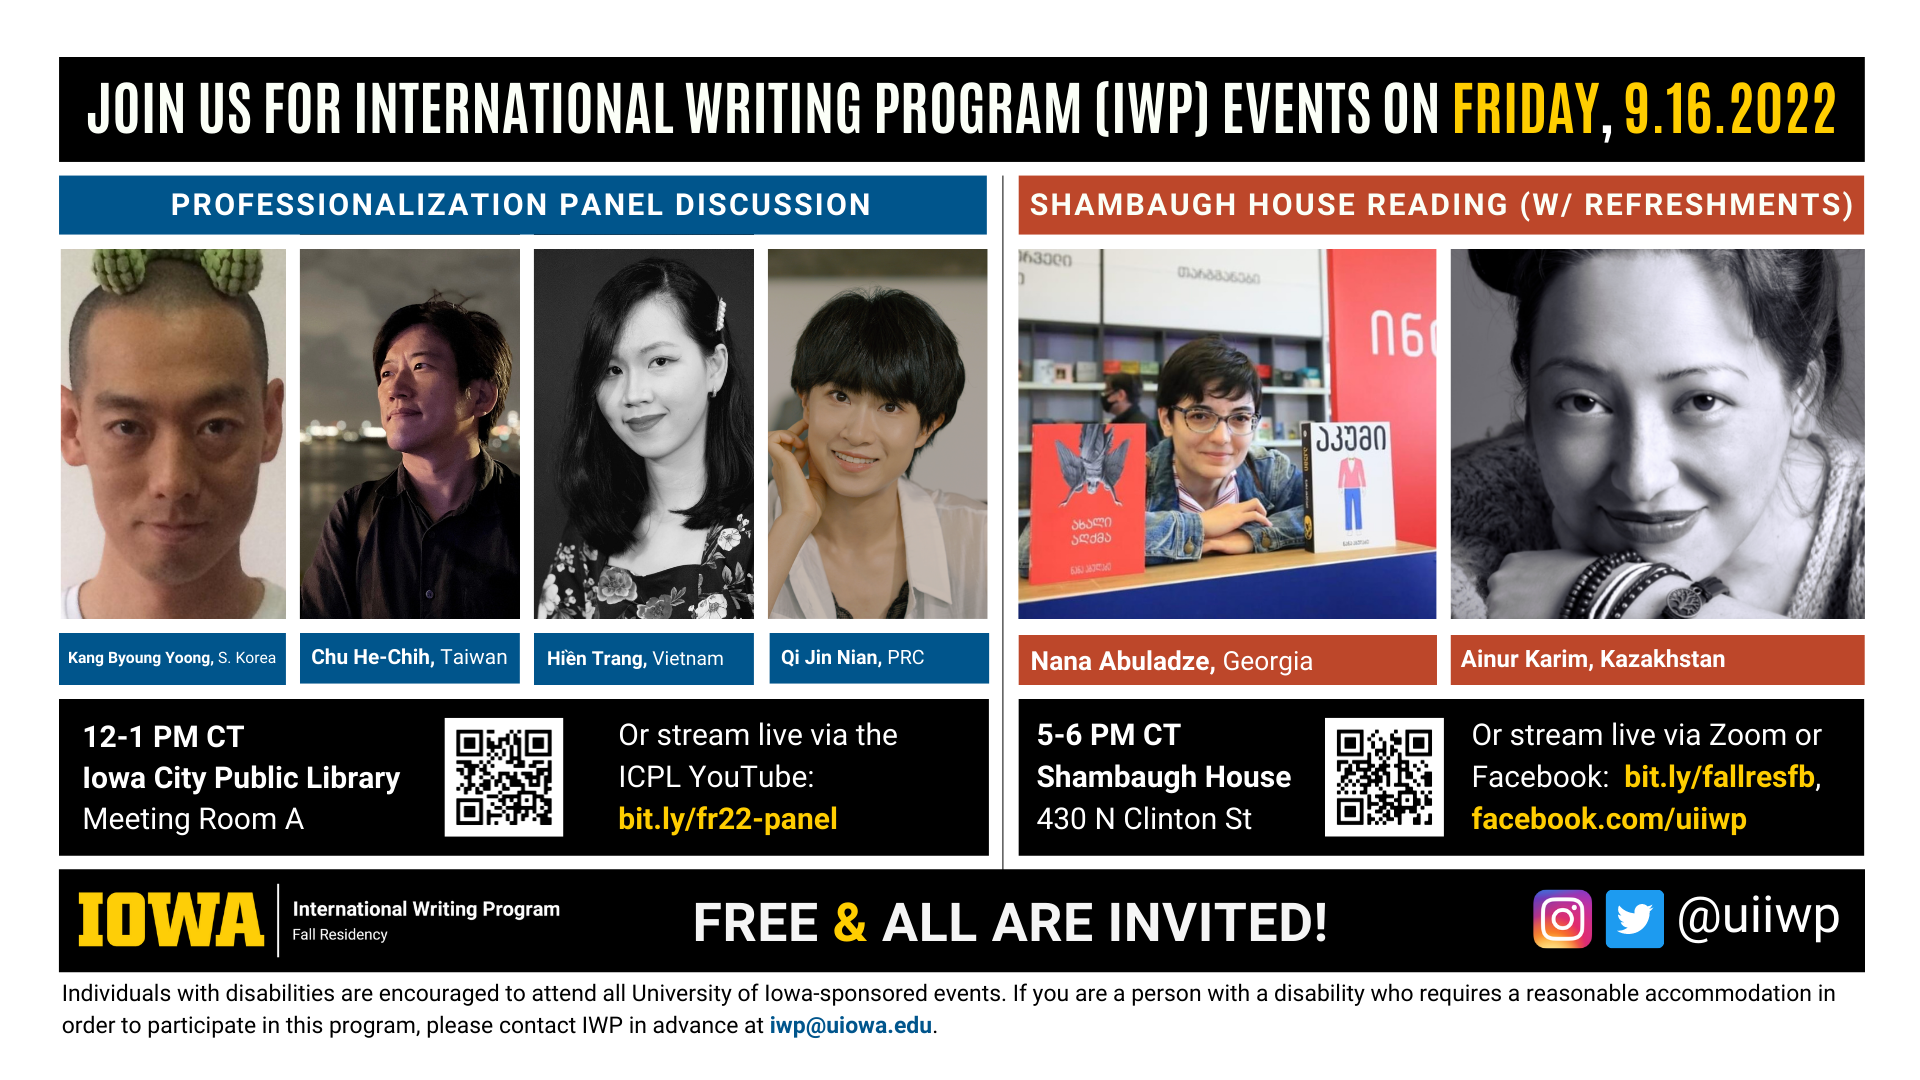 IWP events information for Sept 16